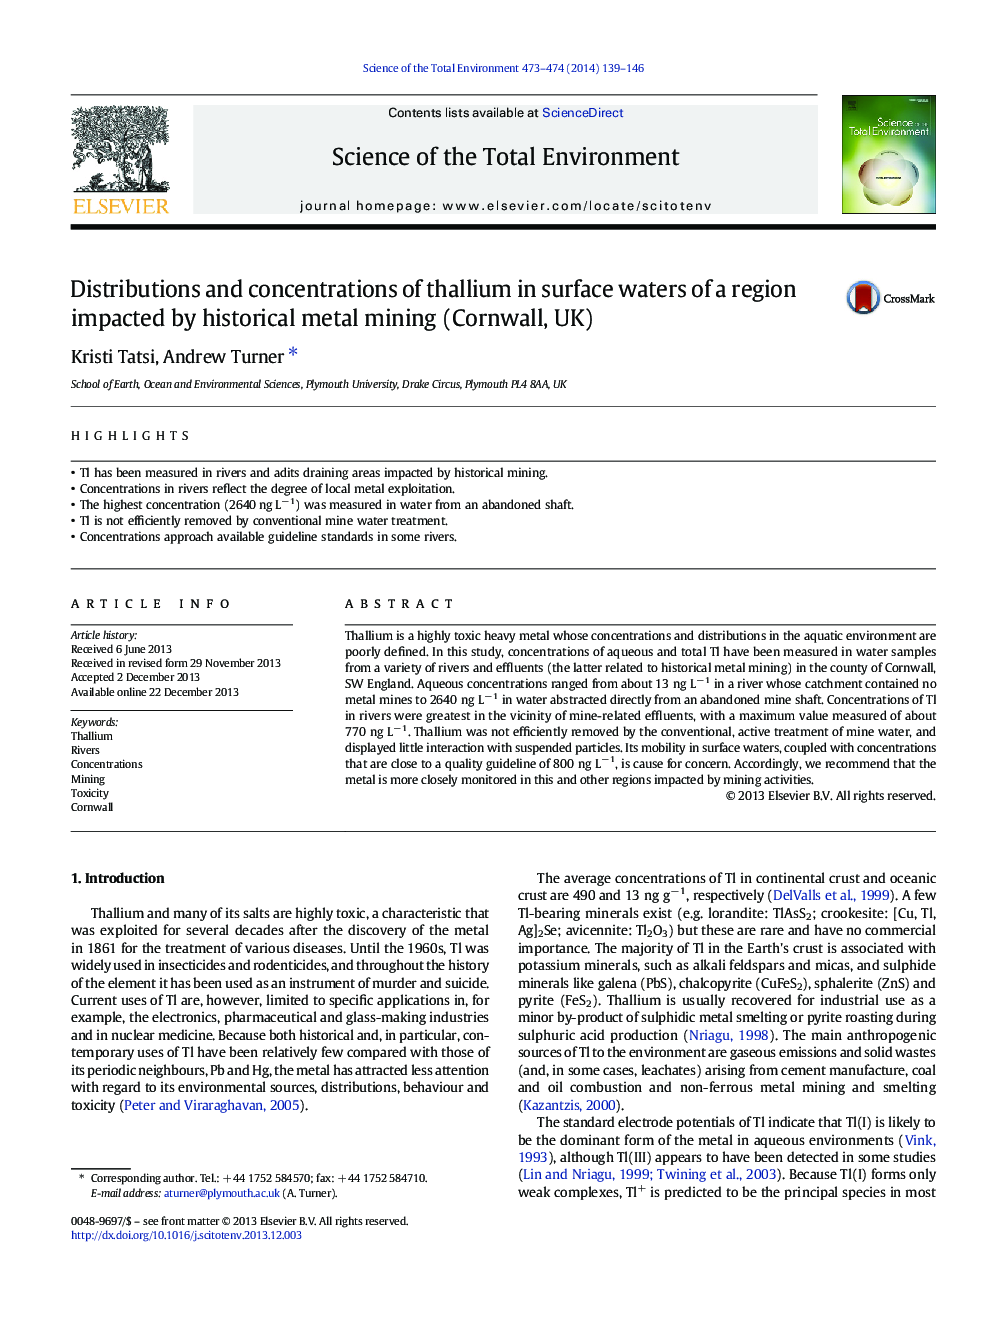 Distributions and concentrations of thallium in surface waters of a region impacted by historical metal mining (Cornwall, UK)